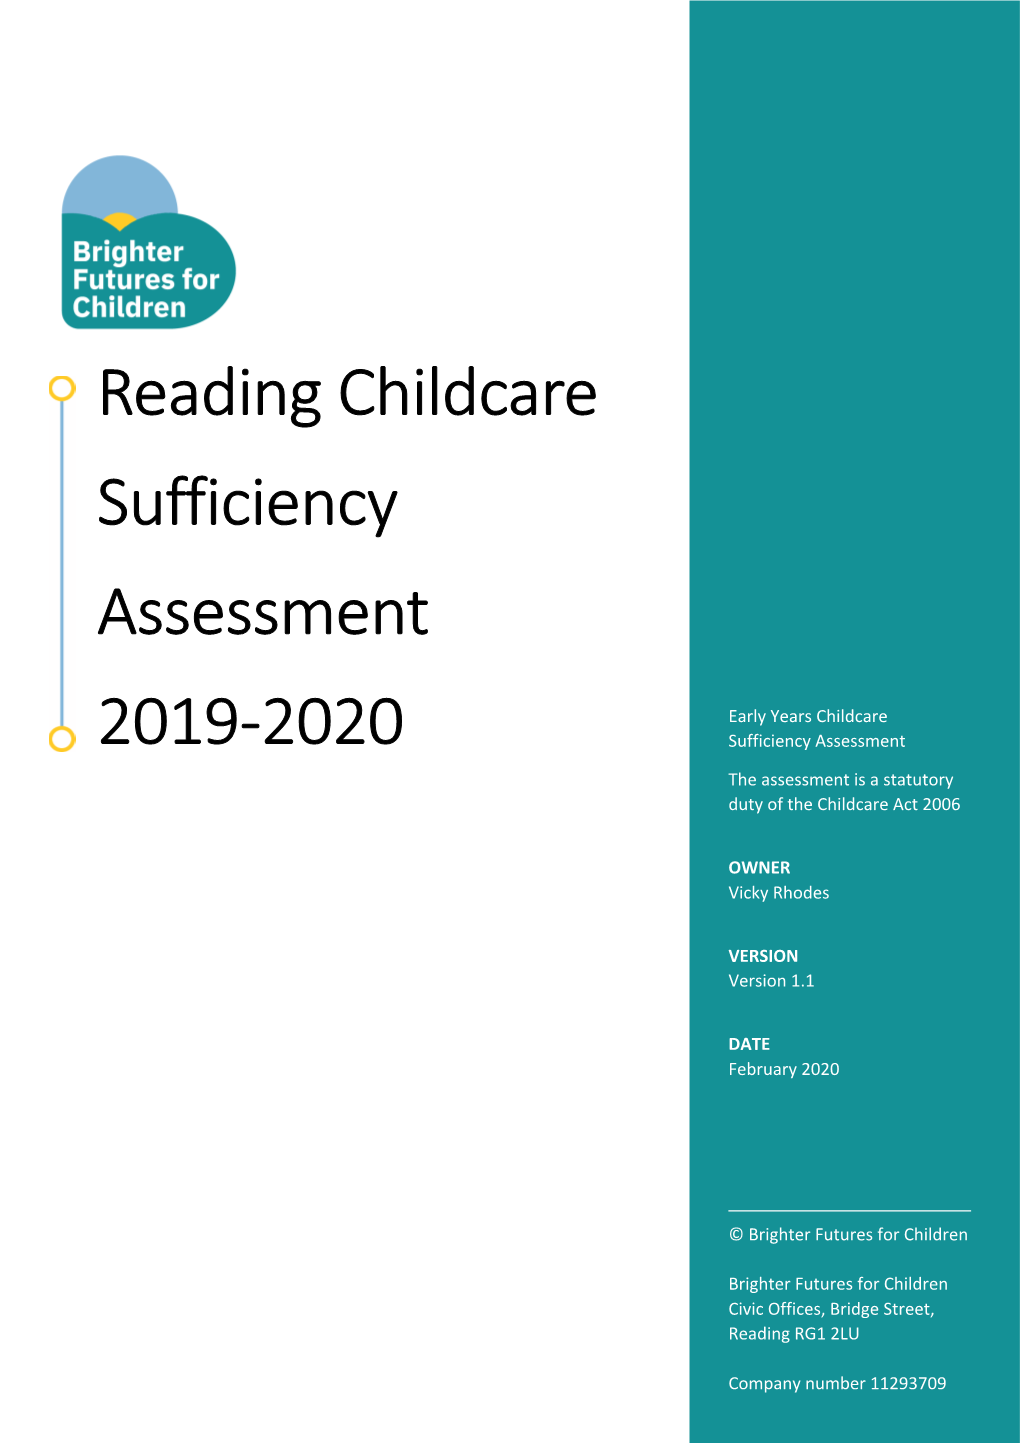 Reading Childcare Sufficiency Assessment 2019-2020 | V1.1| CD 070220 2 Classification: OFFICIAL